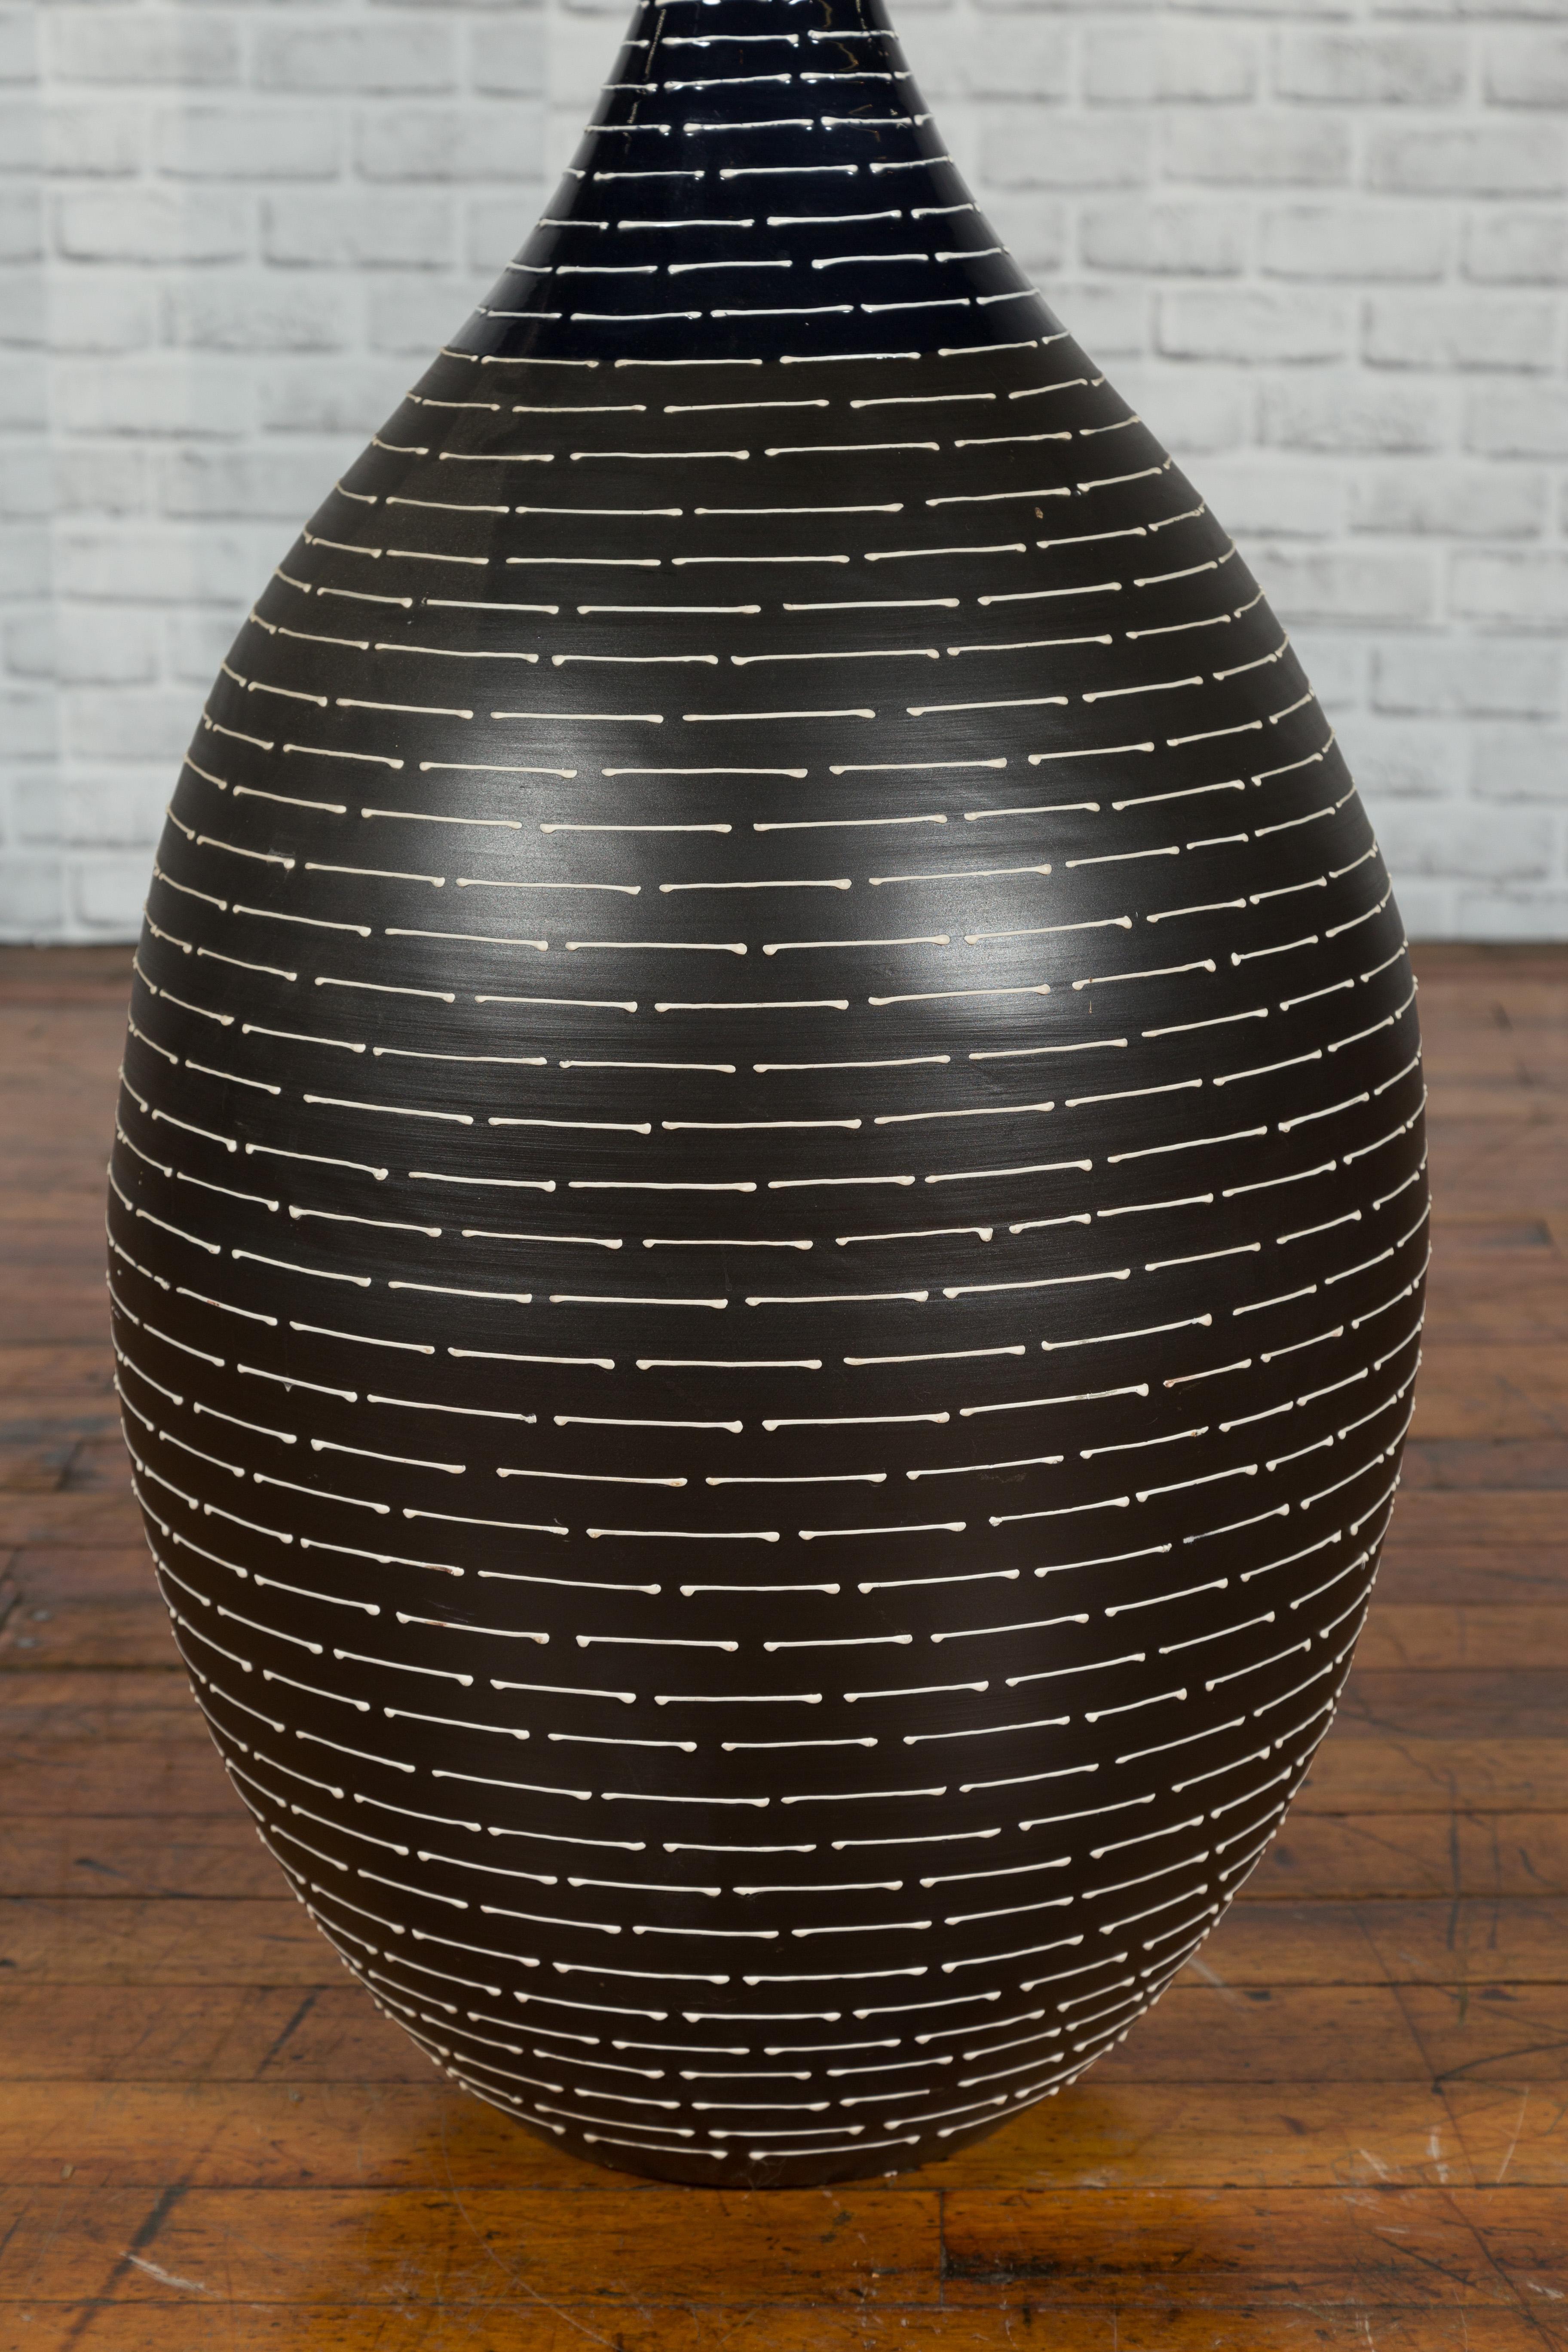 Large Northern Thai Chiang Mai Contemporary Vase from the Prem Collection 2